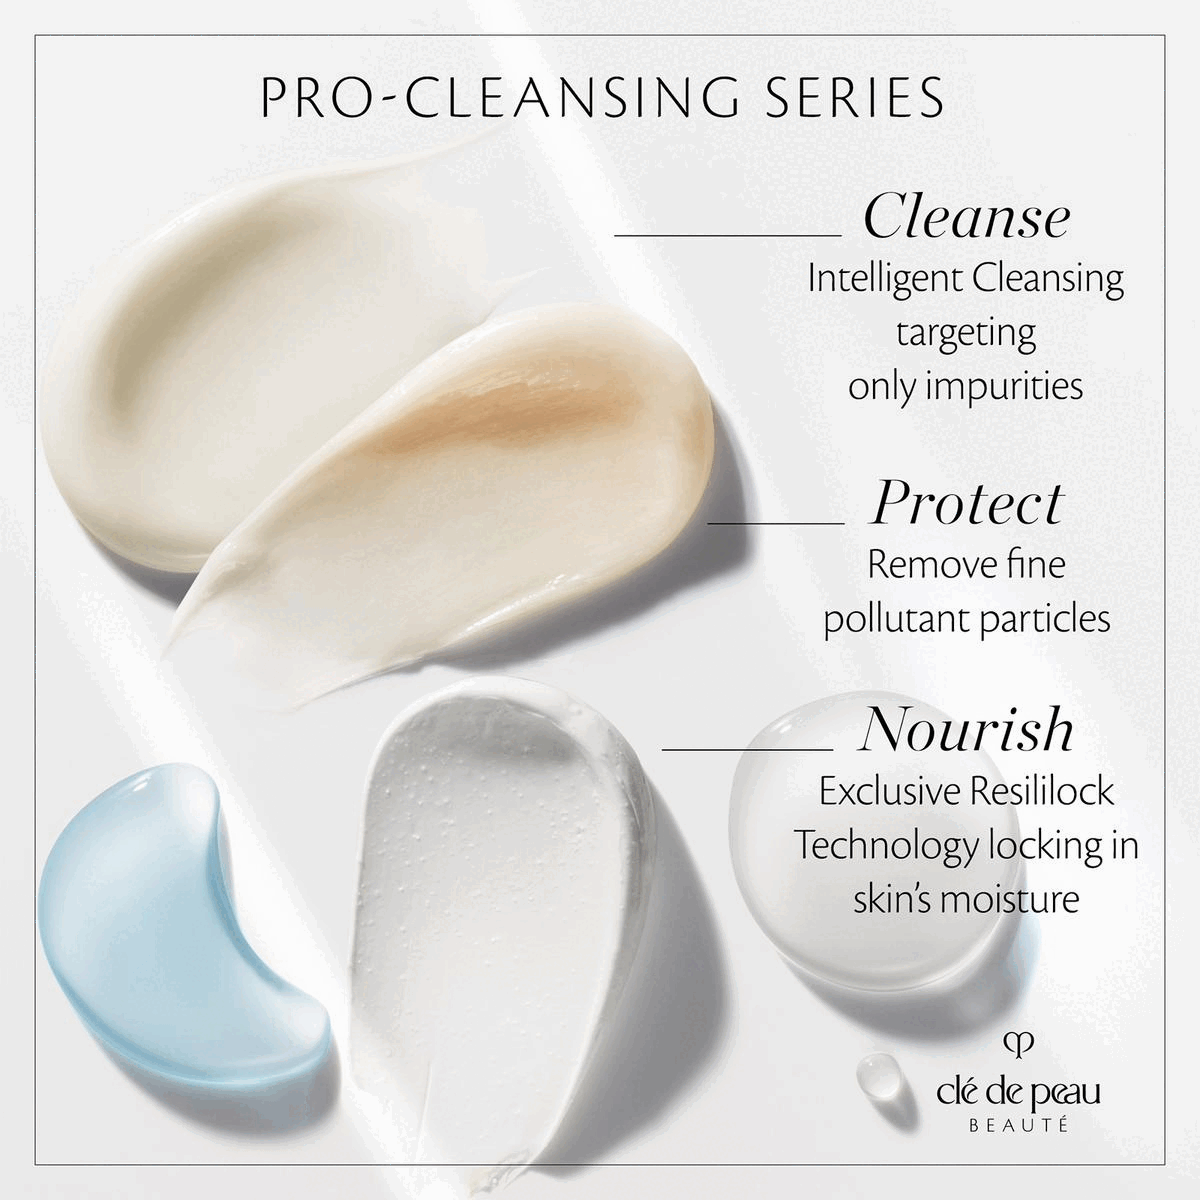 Pro-Cleansing series, cleanse, protect and nourish. Softening cleansing foam benefits